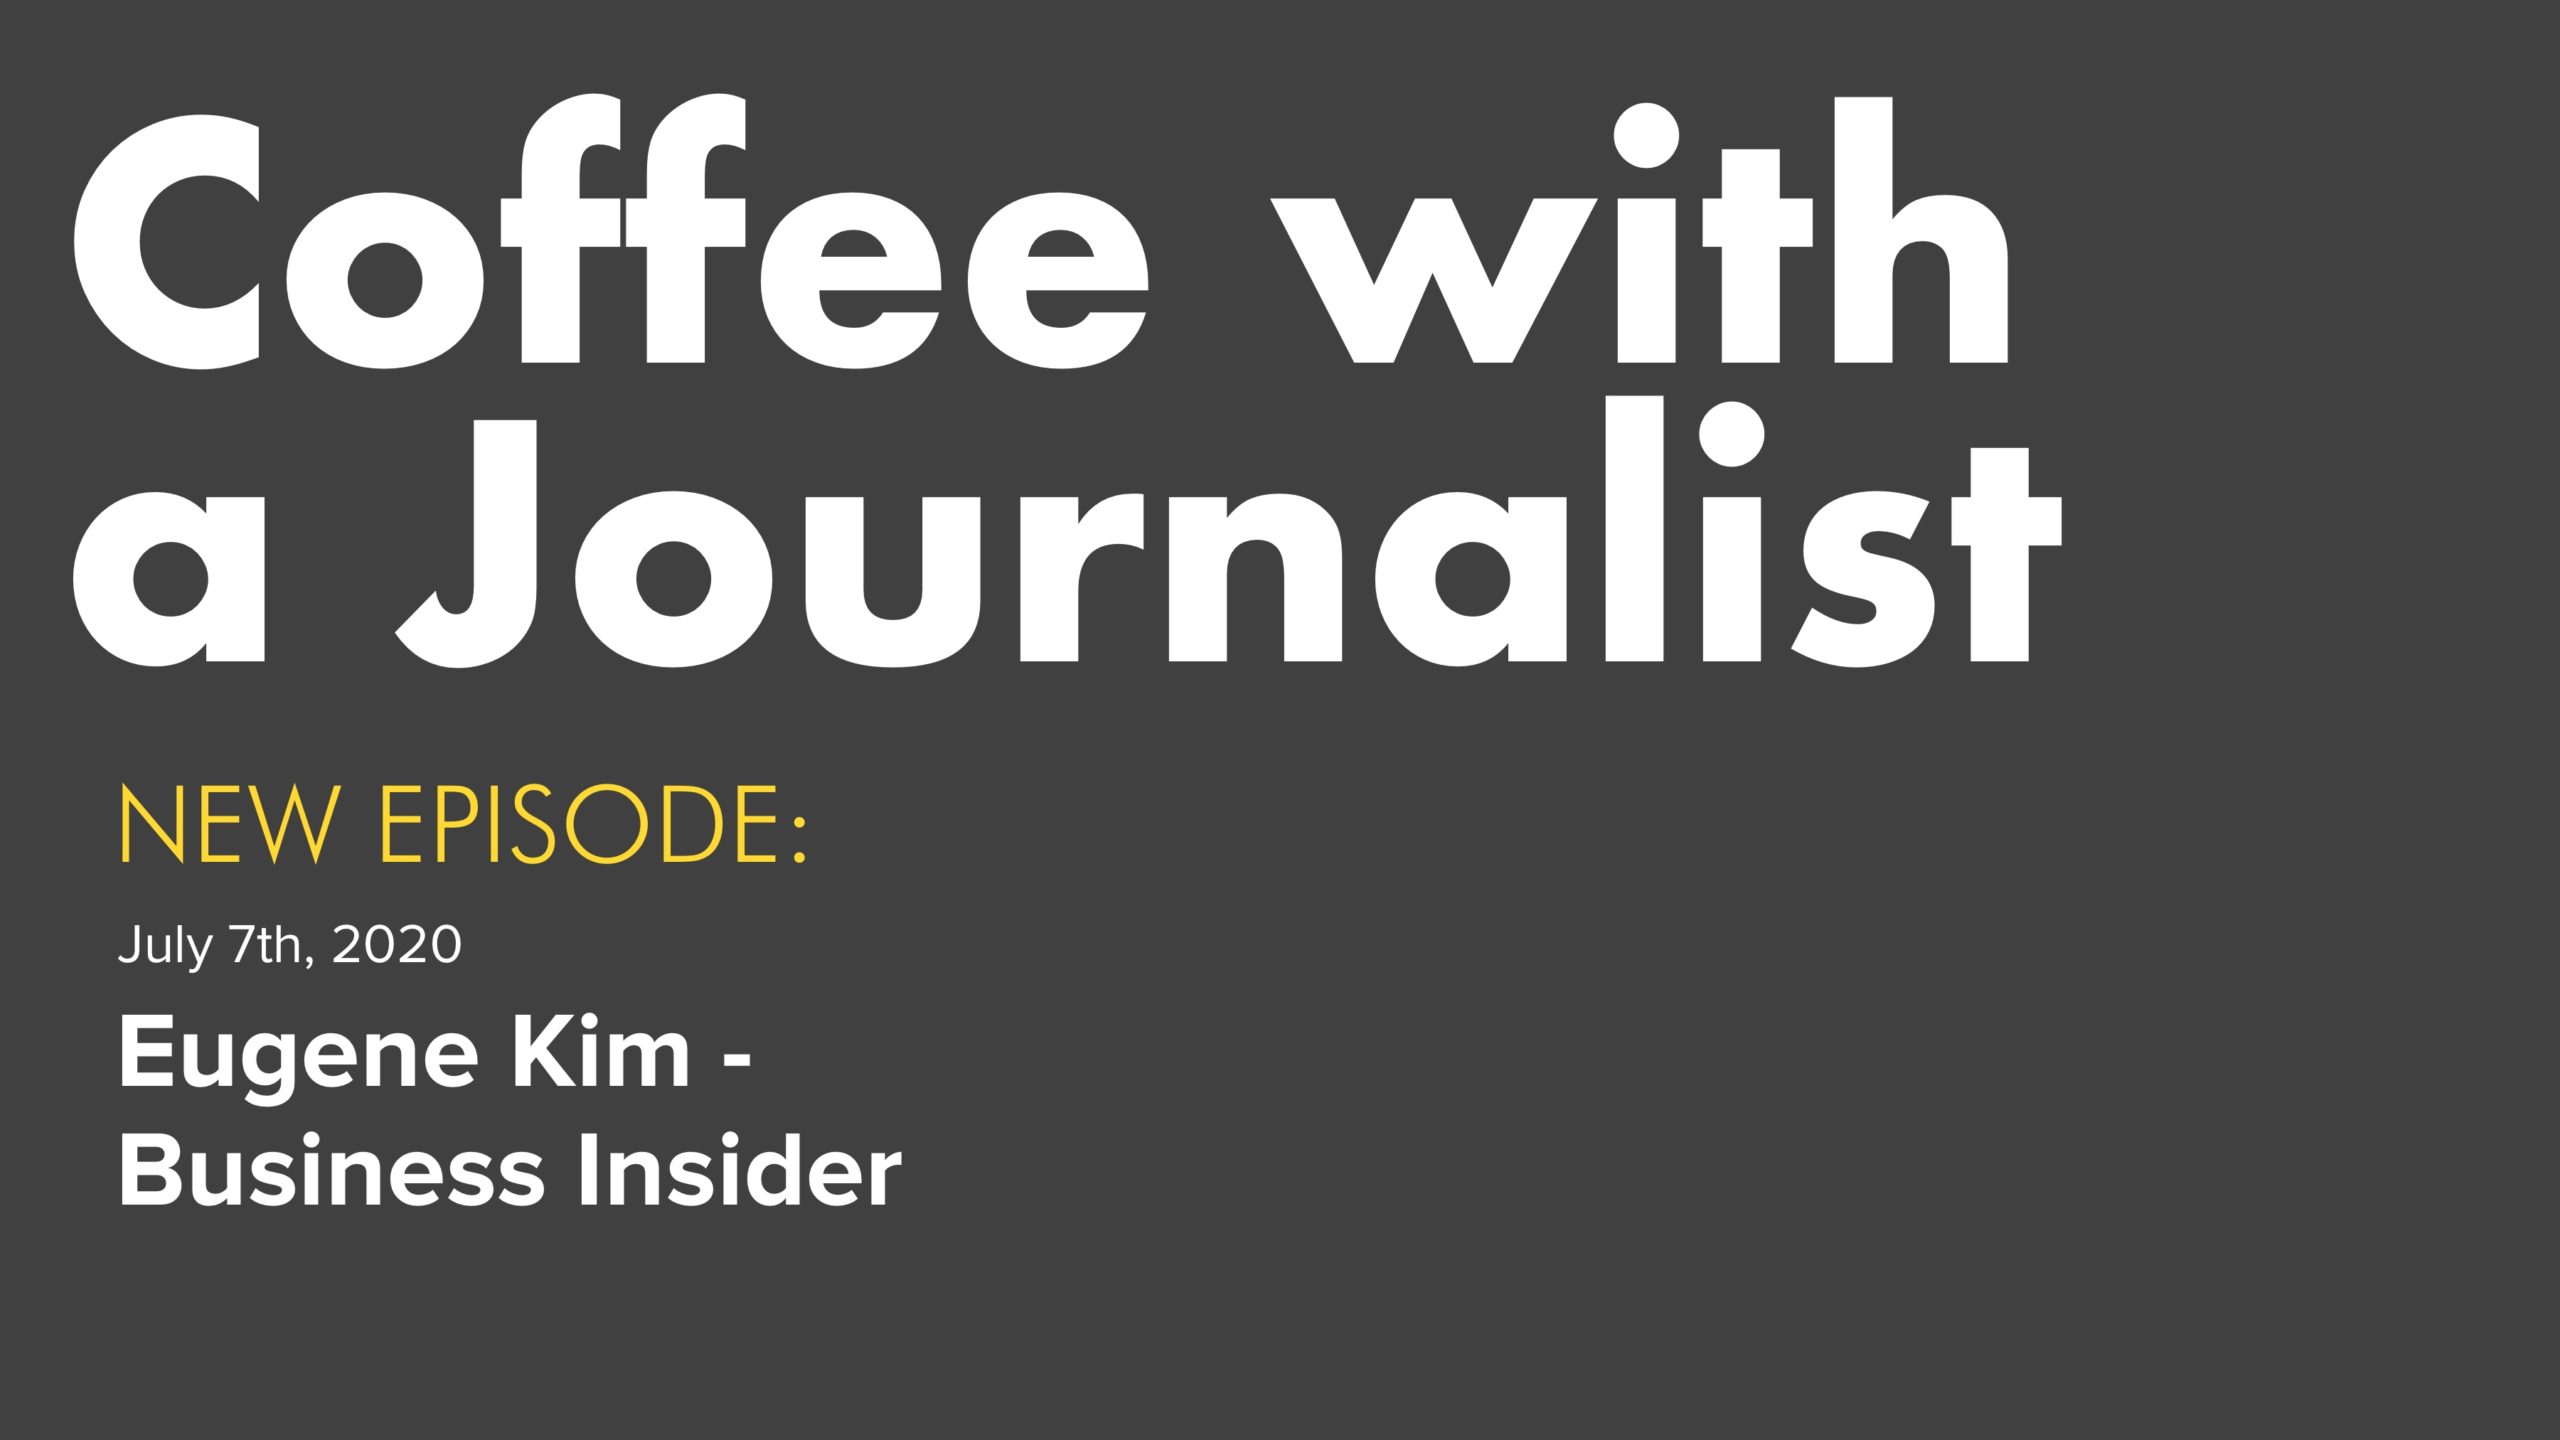 Coffee with a Journalist: Eugene Kim, Business Insider